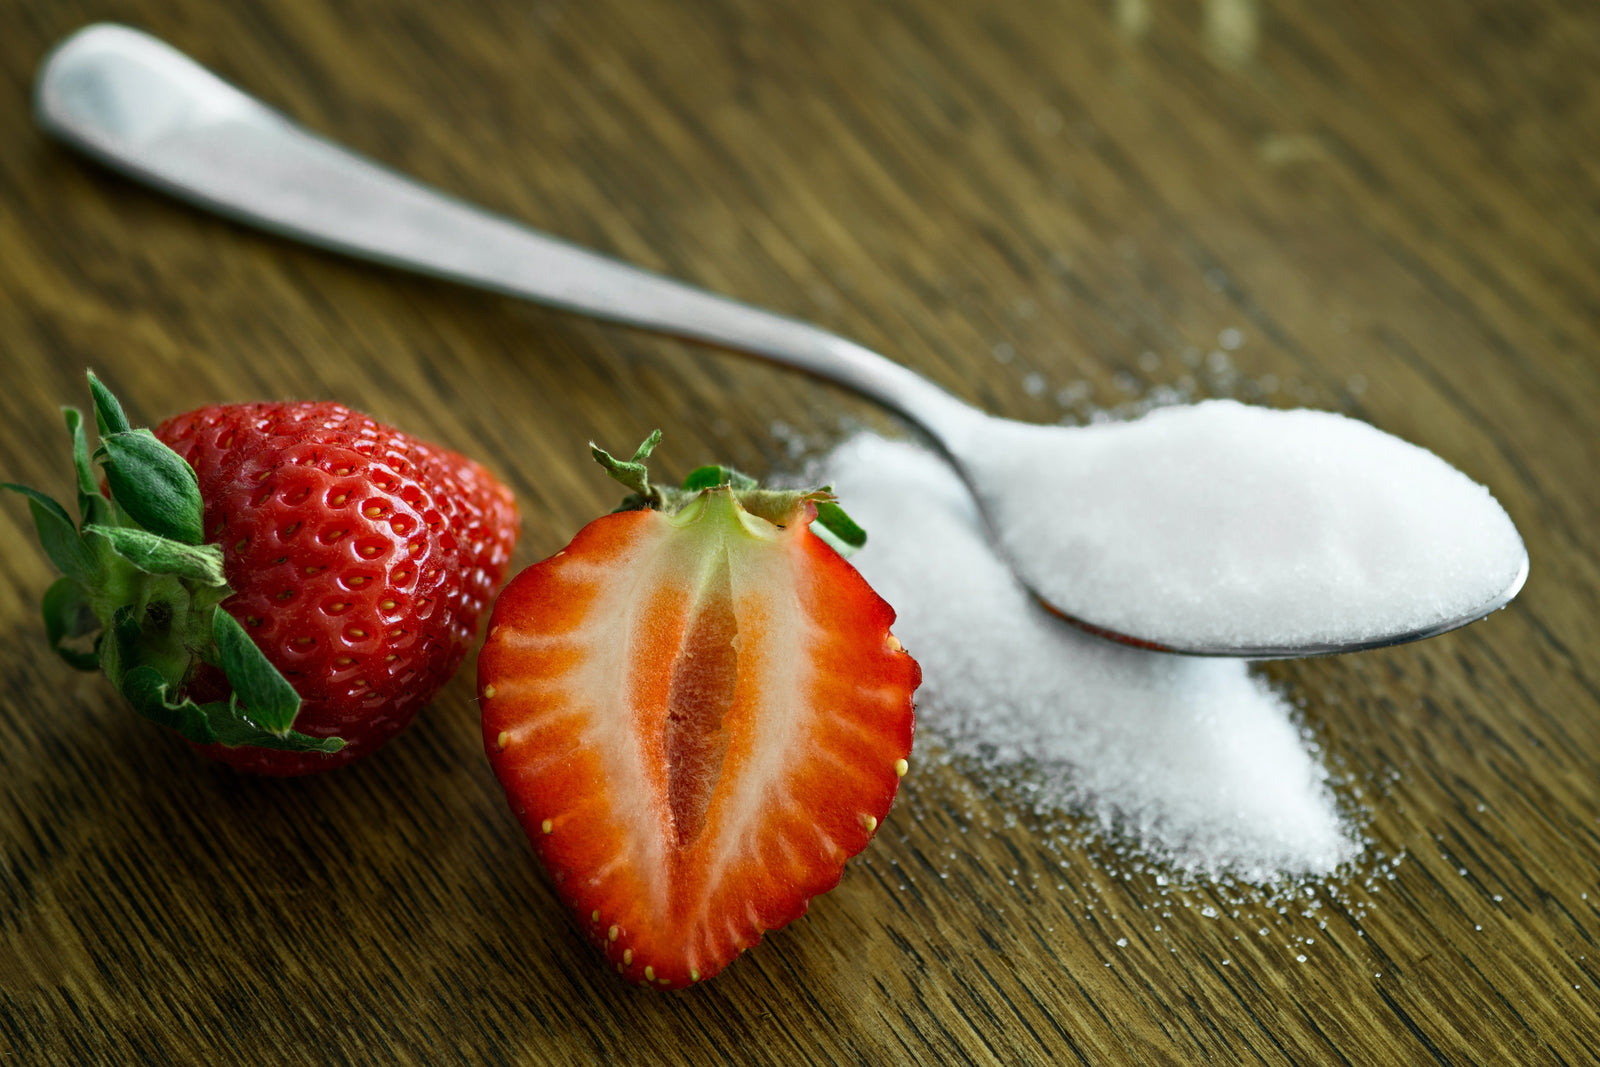 Bittersweet – Are Sweeteners Affecting You?